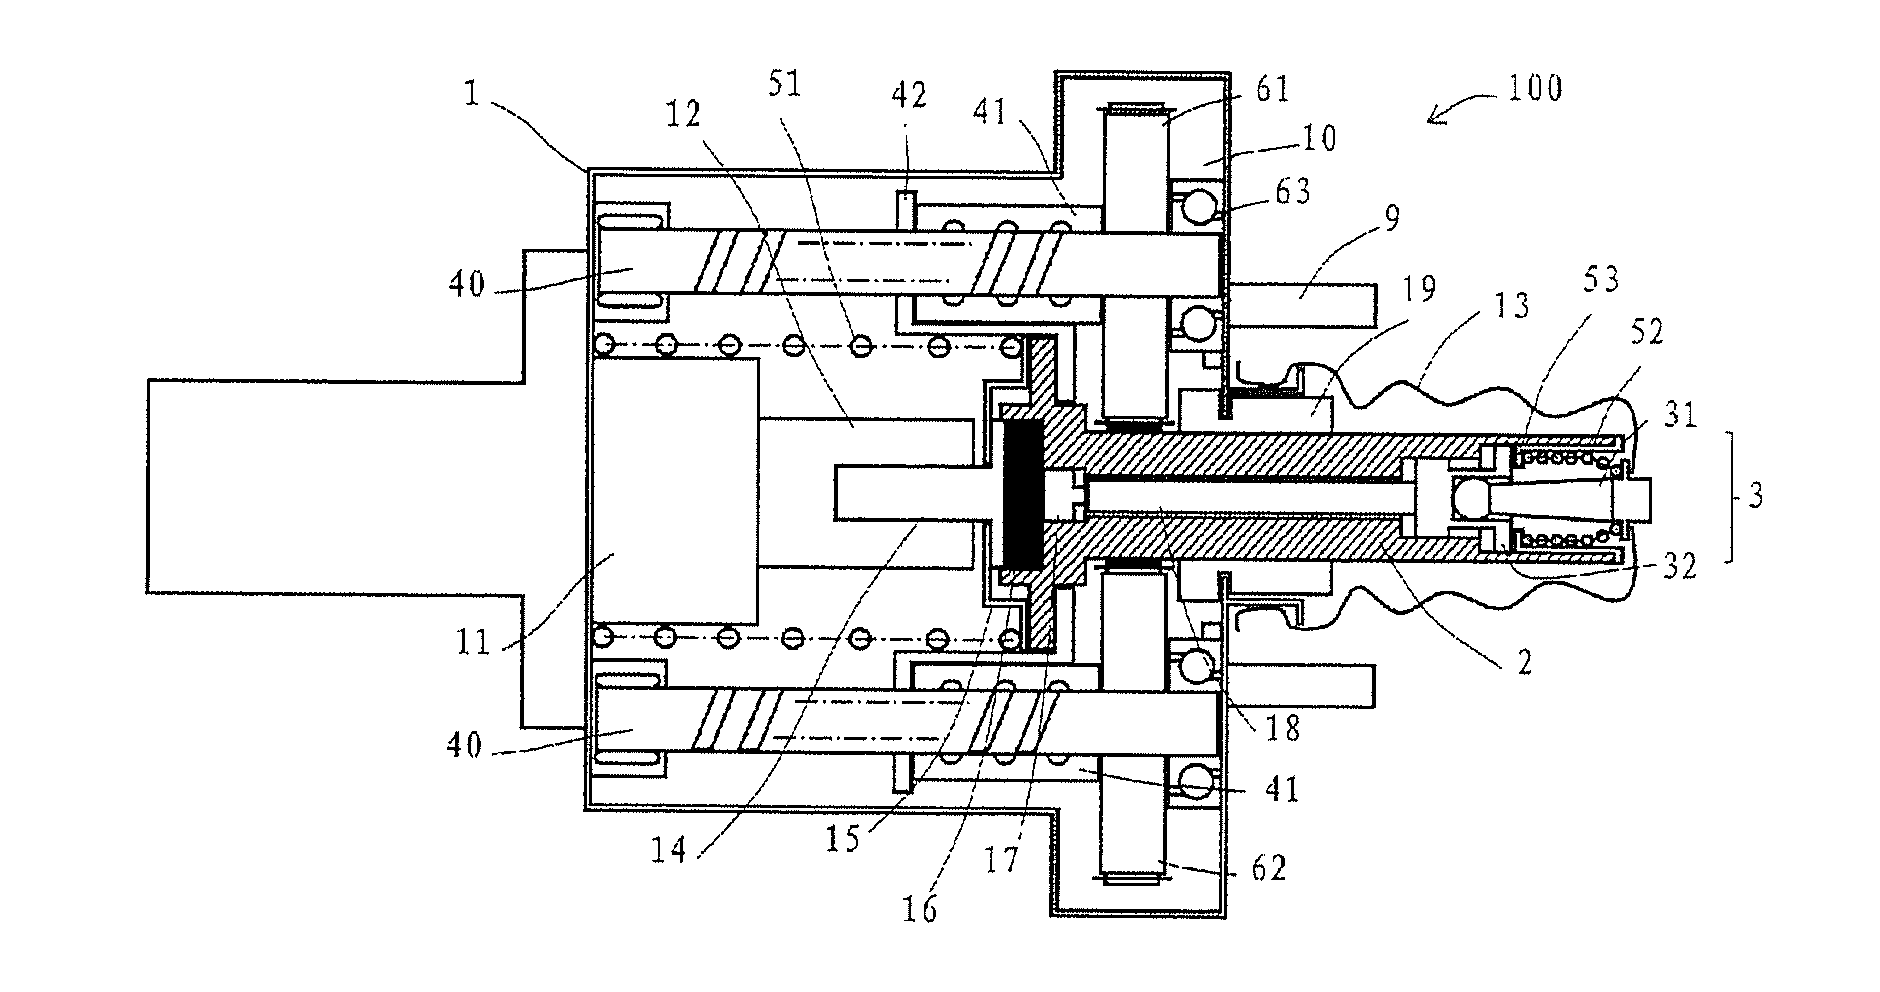 Power Assist Device and Brake System